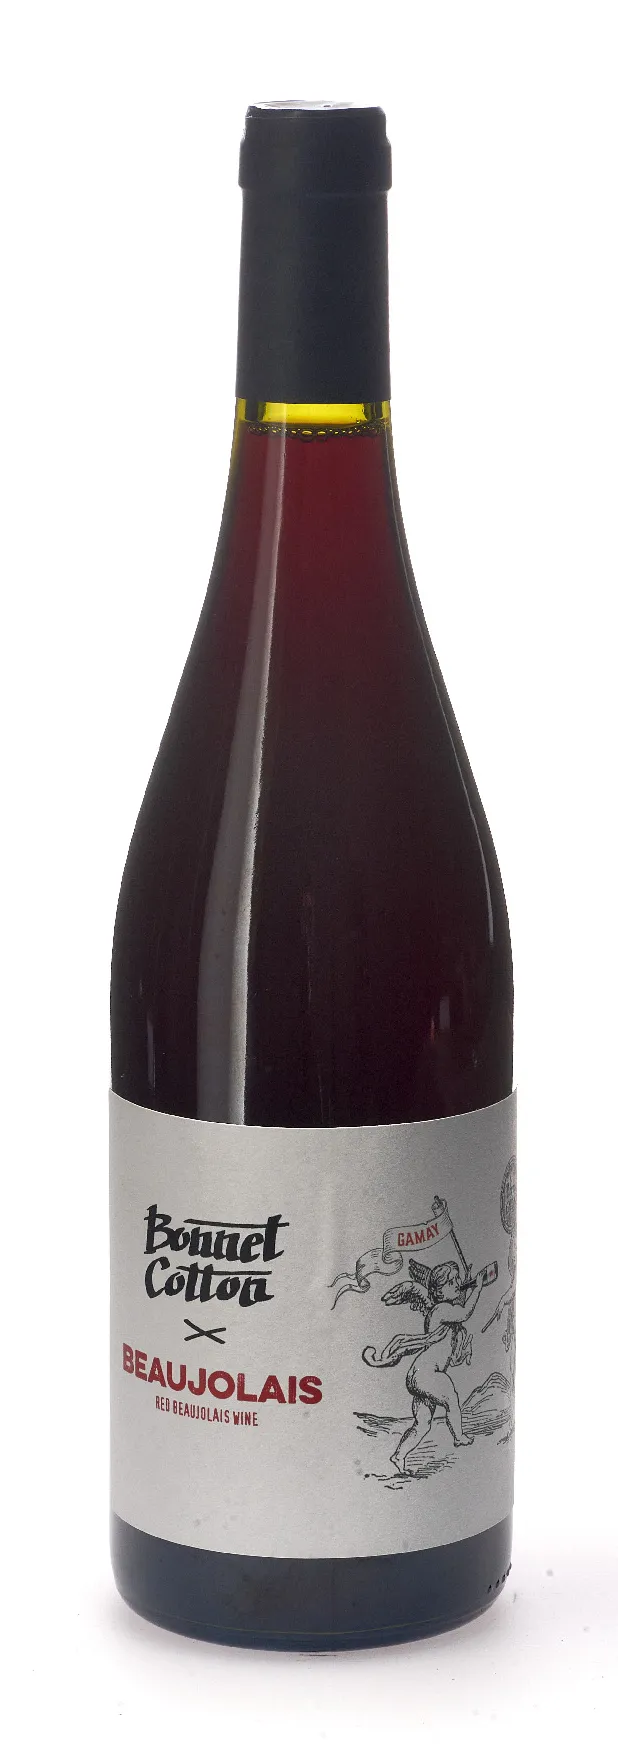 Bottle of Pierre Cotton Beaujolais from search results